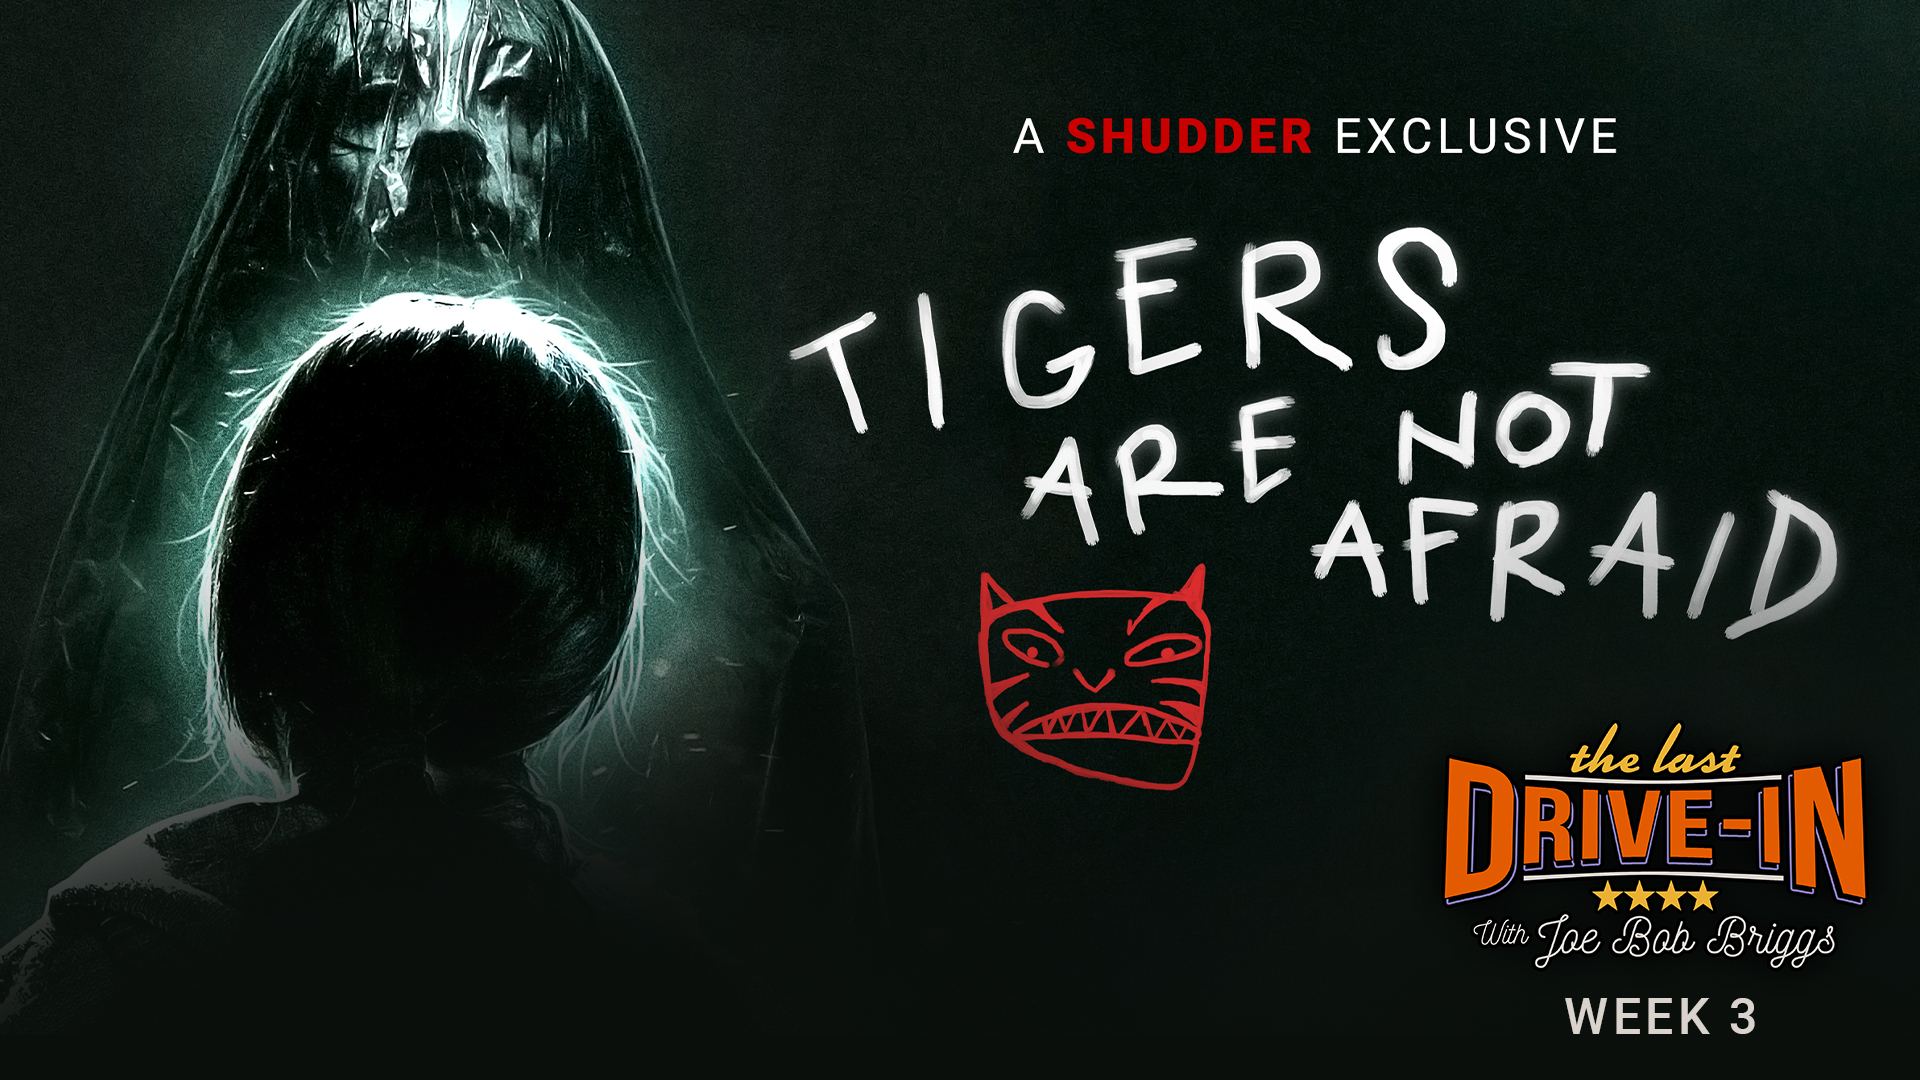 Week 3: Tigers Are Not Afraid, Orphaned children are unexpectedly given magical wishes., TV-MA, Season 1062609, Episode 6